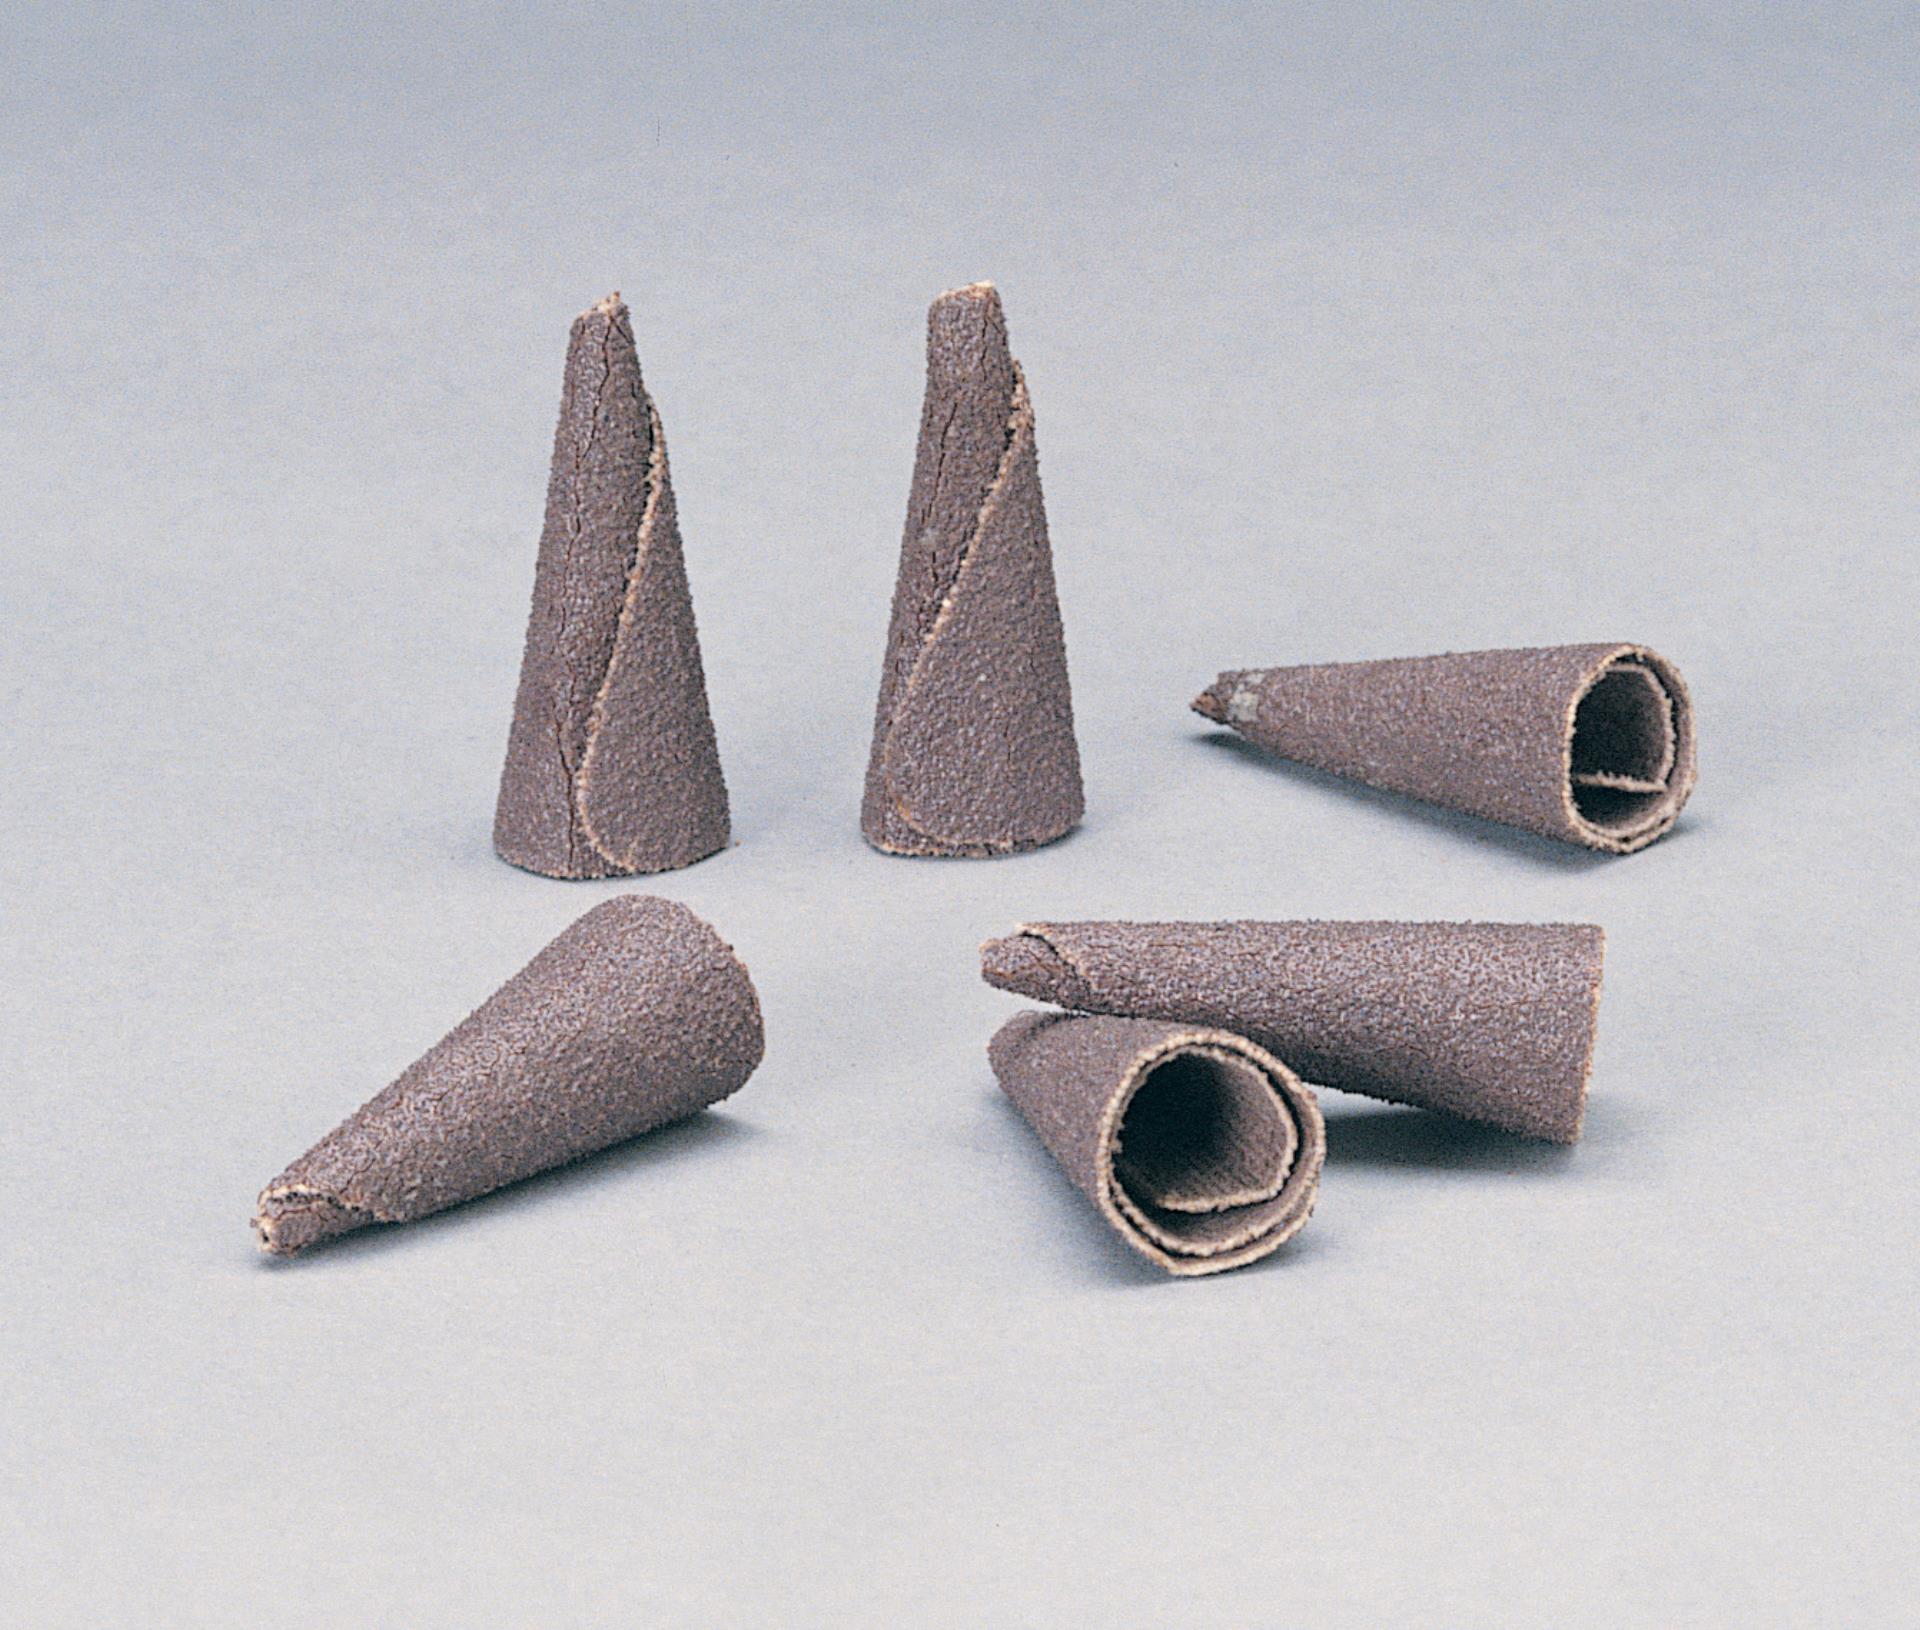 https://www.e-aircraftsupply.com/ItemImages/94/7010368594_Standard_Abrasives_AO_Tapered_Cone_Point_704972.jpg